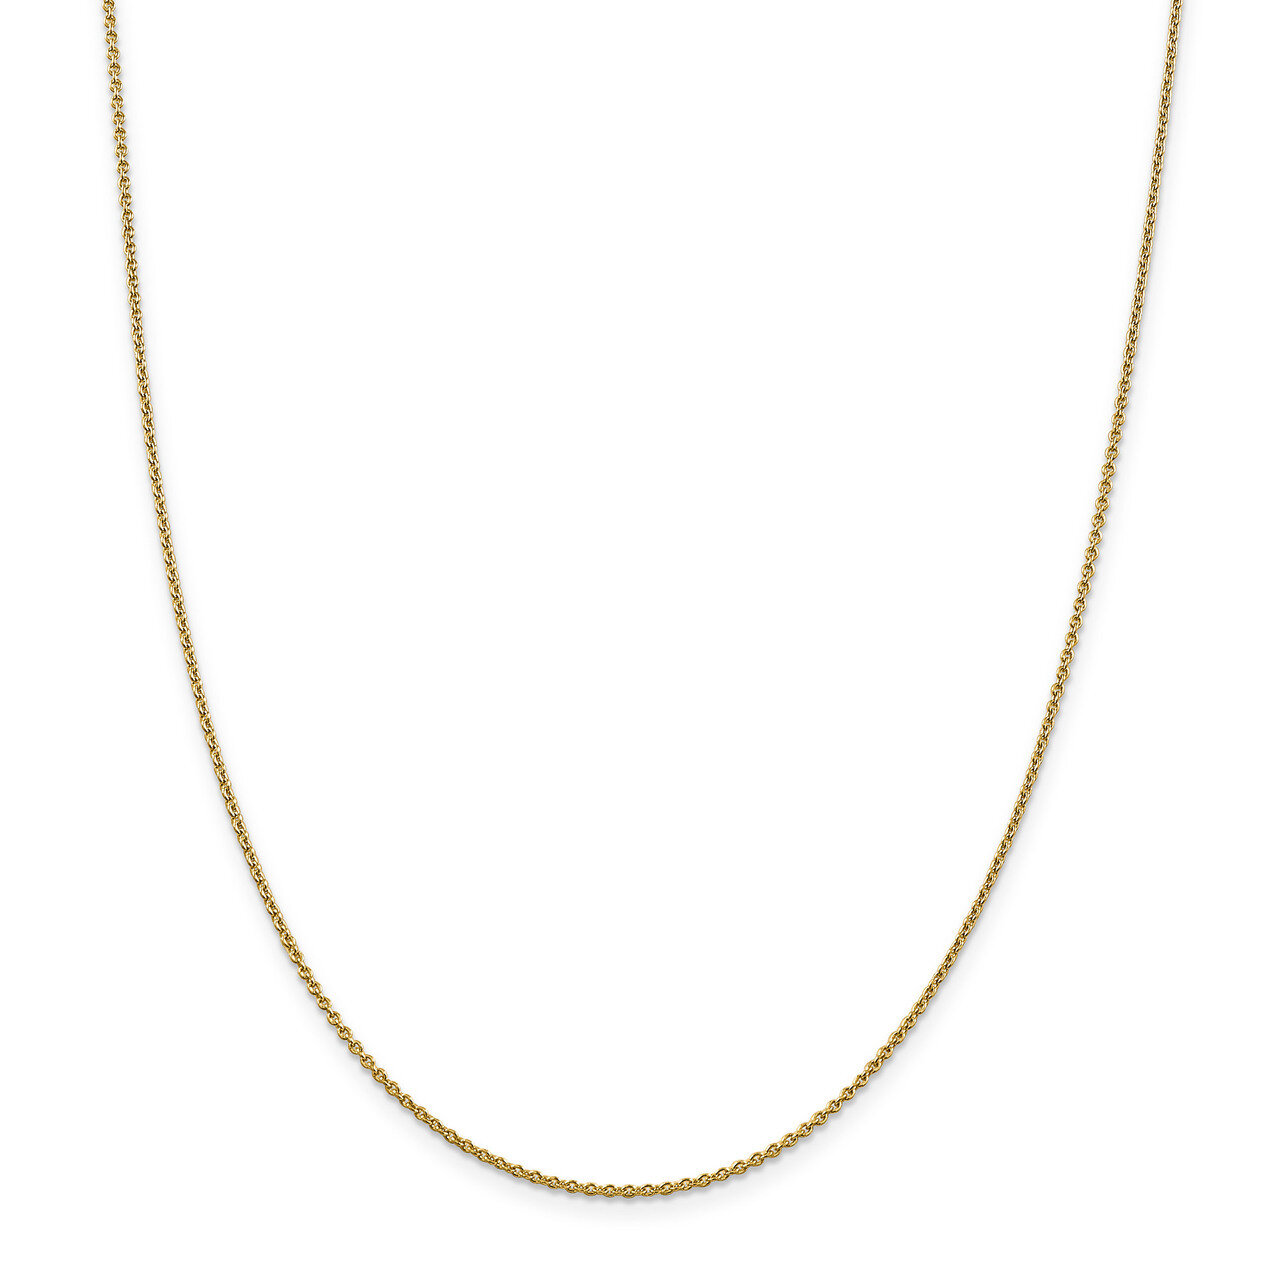 24 Inch 1.4mm Solid Polished Cable Chain 14k Gold PEN328-24